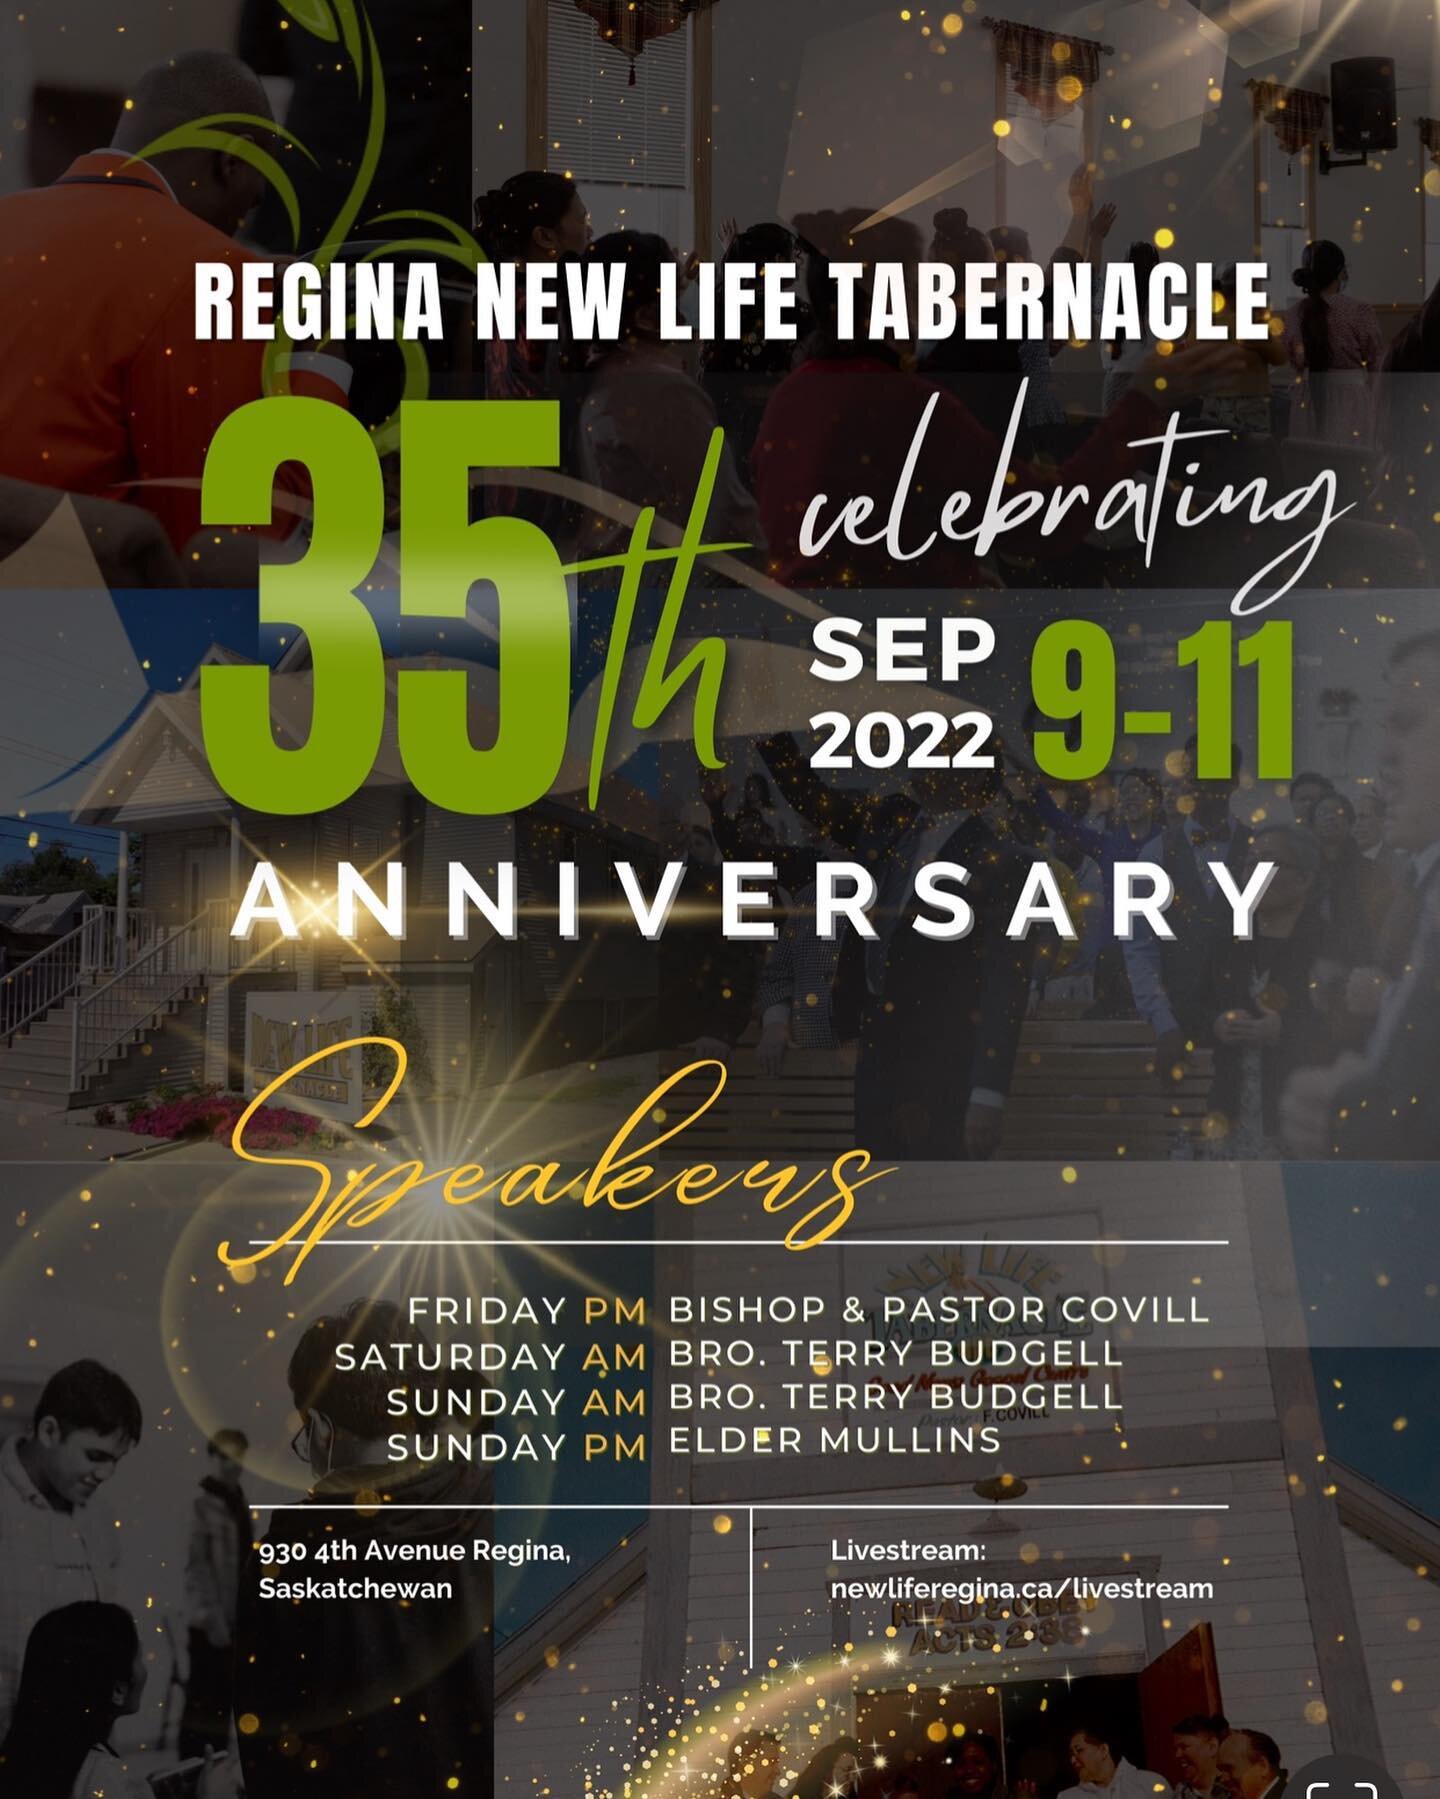 You&rsquo;re invited! 

RNLT 35th anniversary services start tonight. We can&rsquo;t wait to hear the word from our very own Bishop F. Covill and Pastor P. Covill!

#RNLT35th